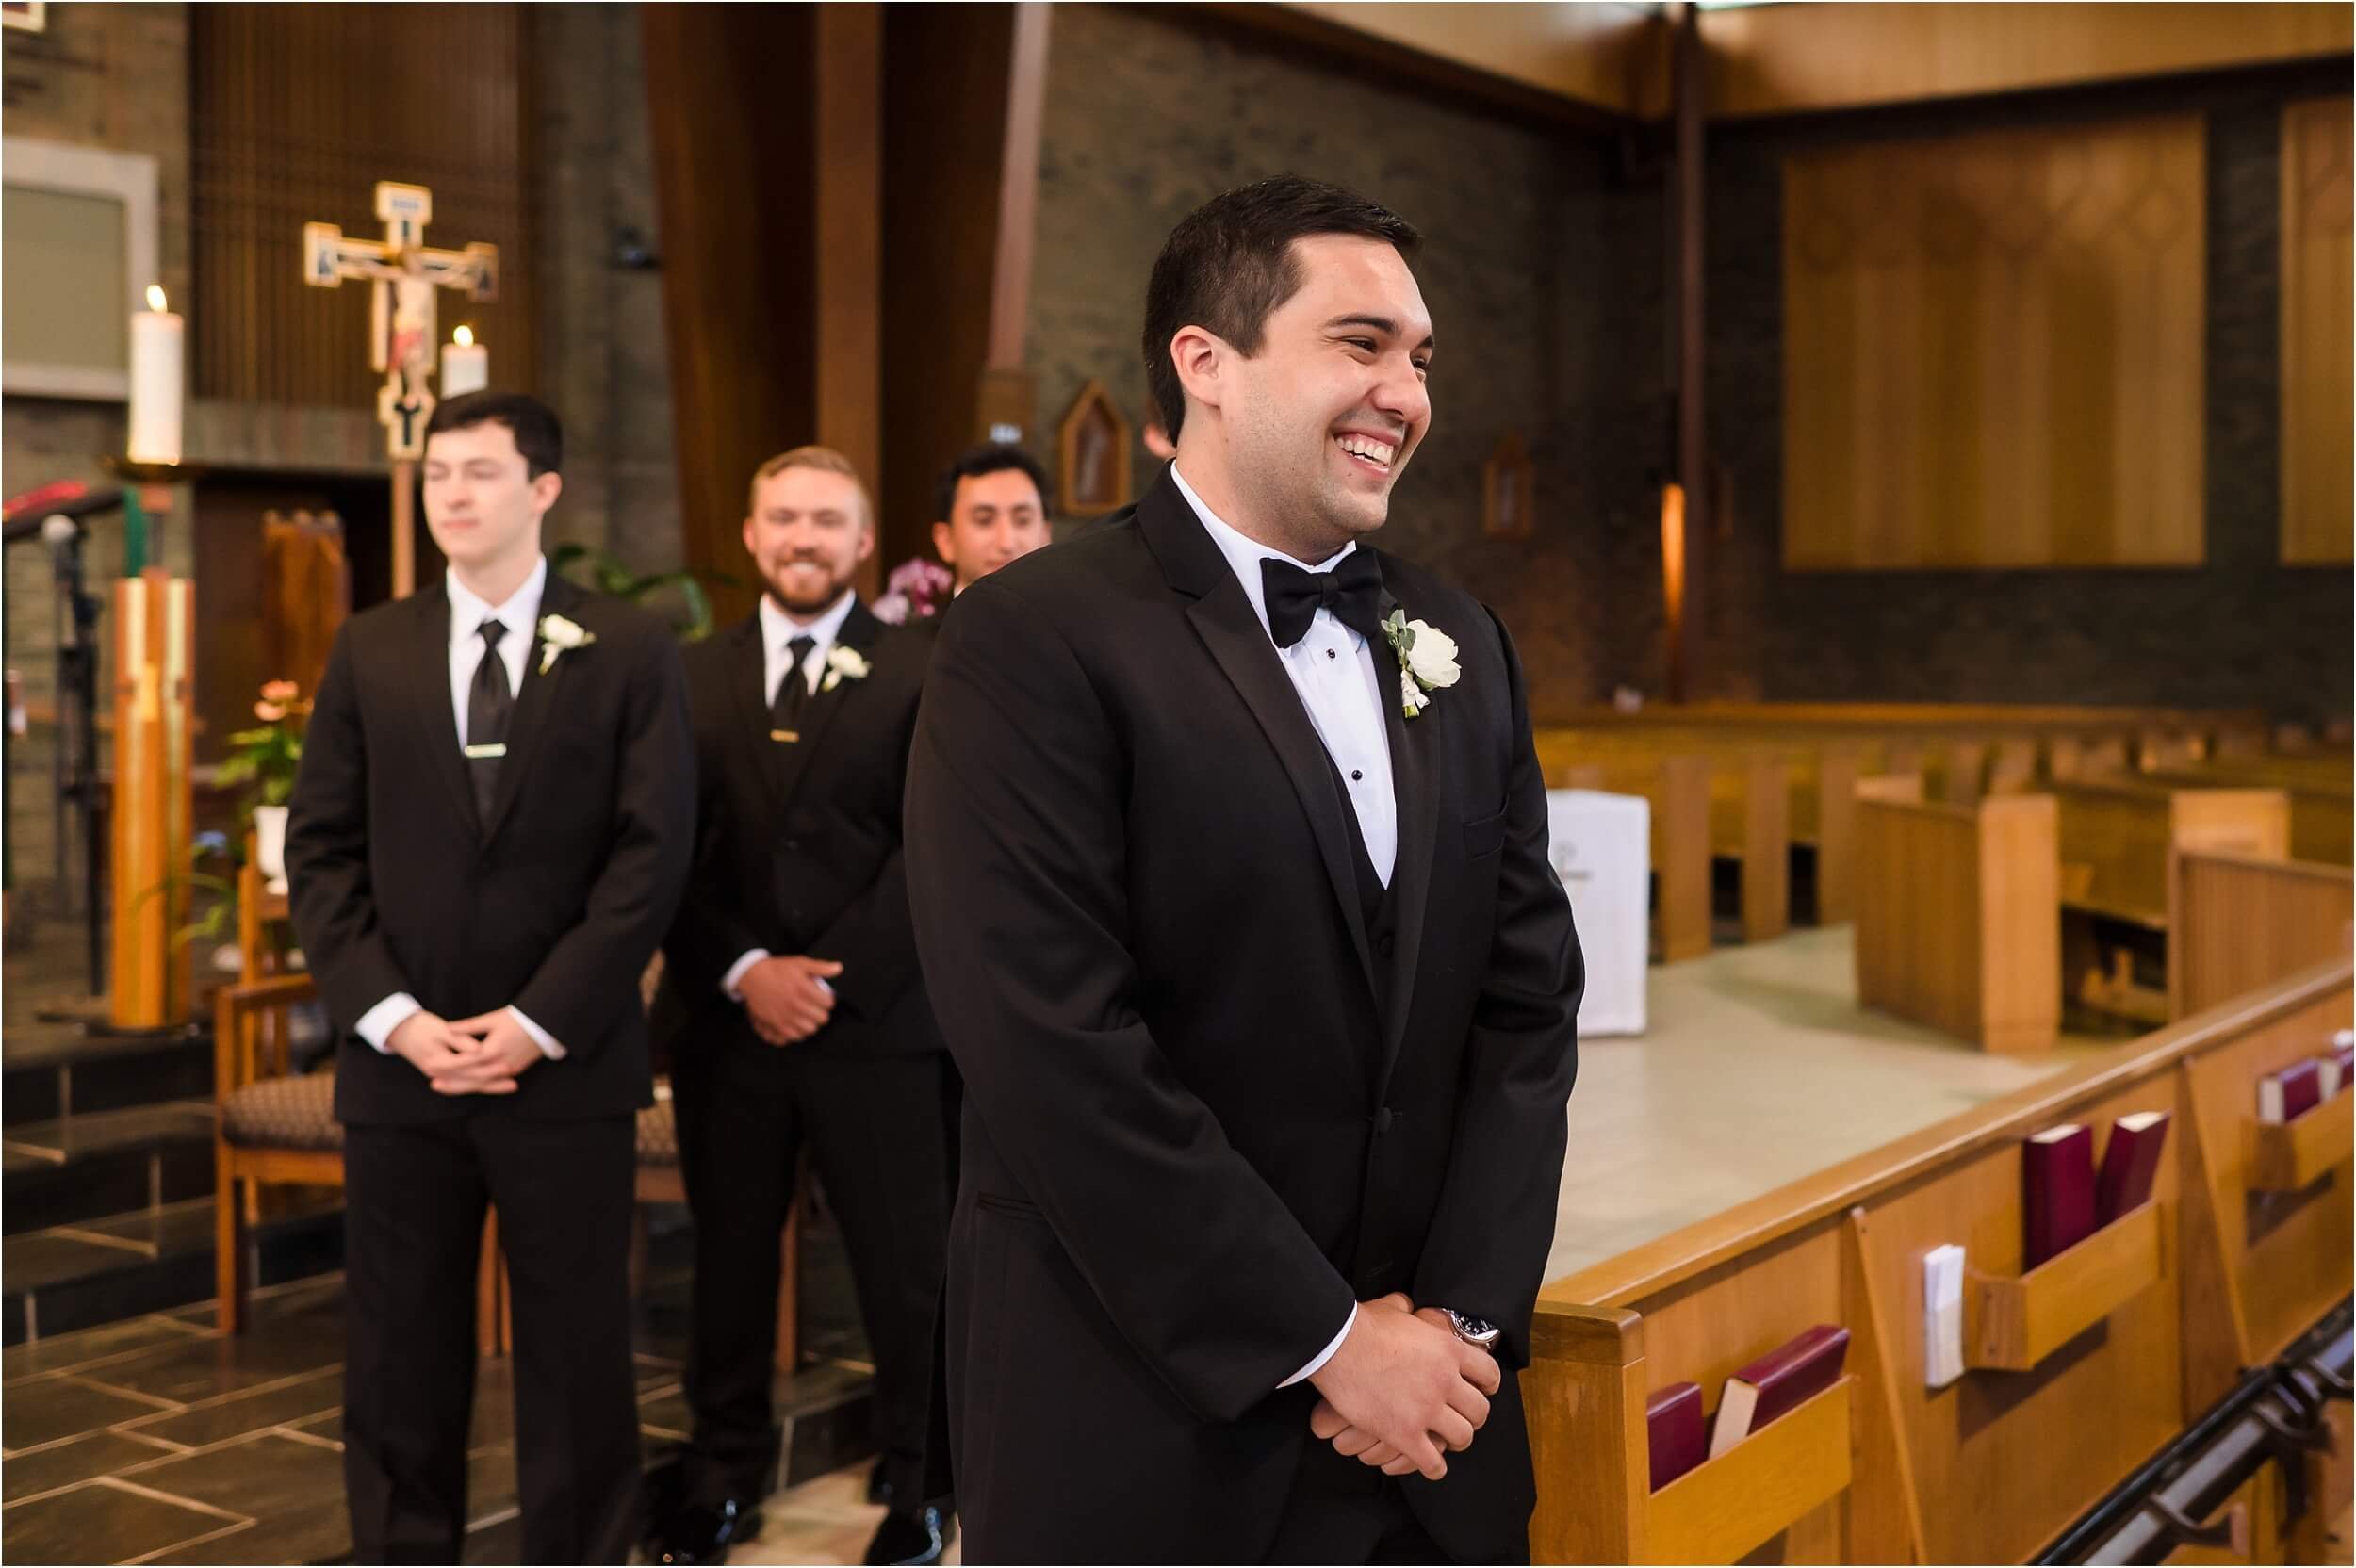  A smiles at his bride coming down the aisle at St Francis of Assisi Church in Ann Arbor.  